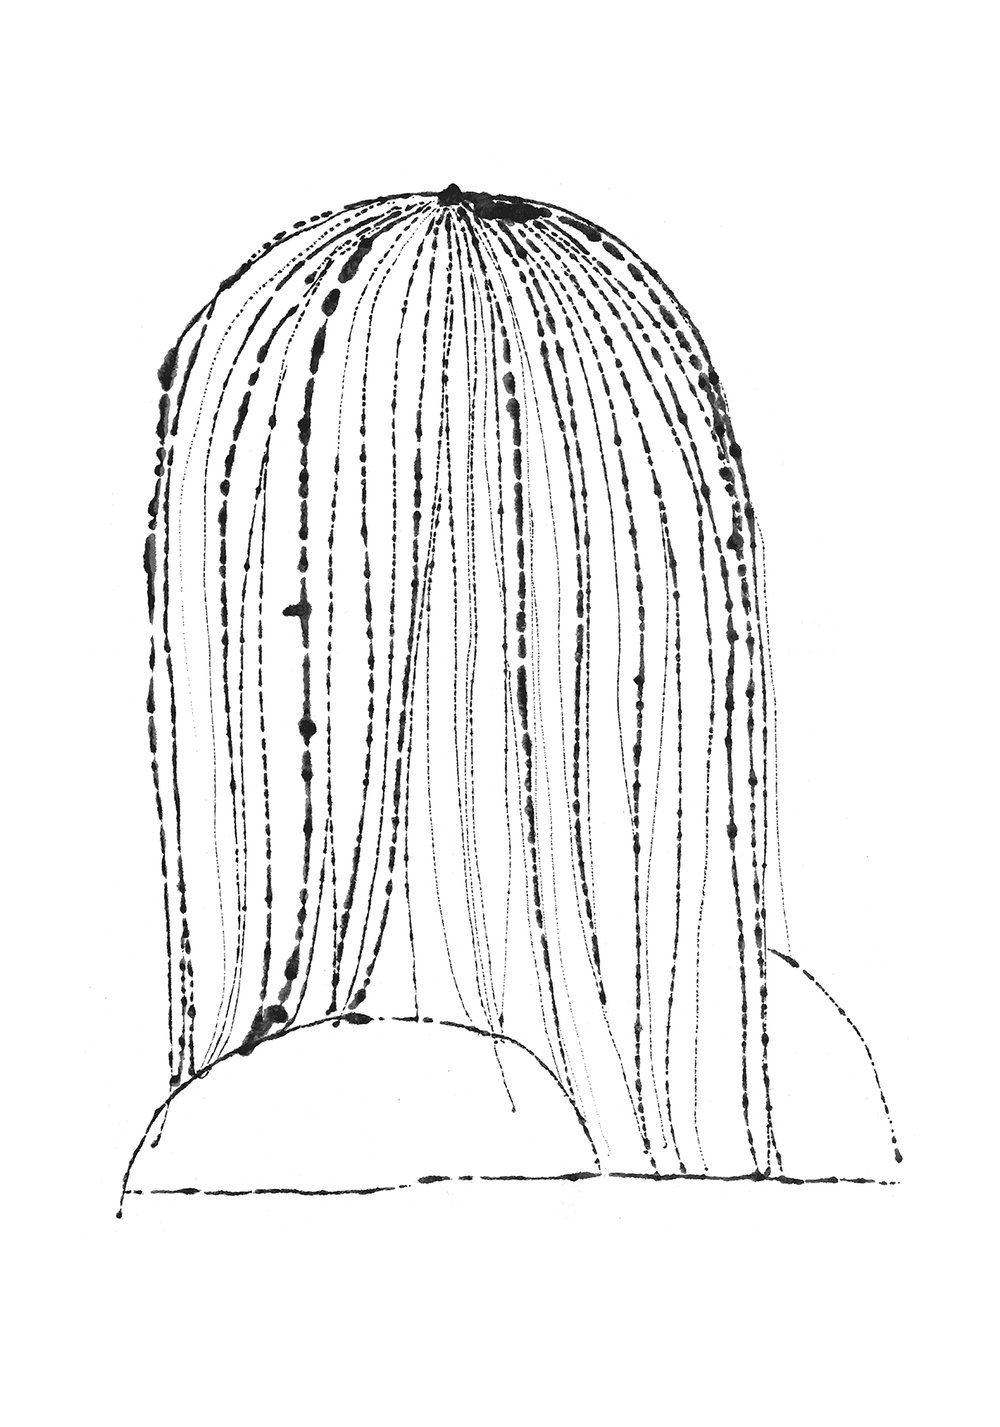 Image of The Head